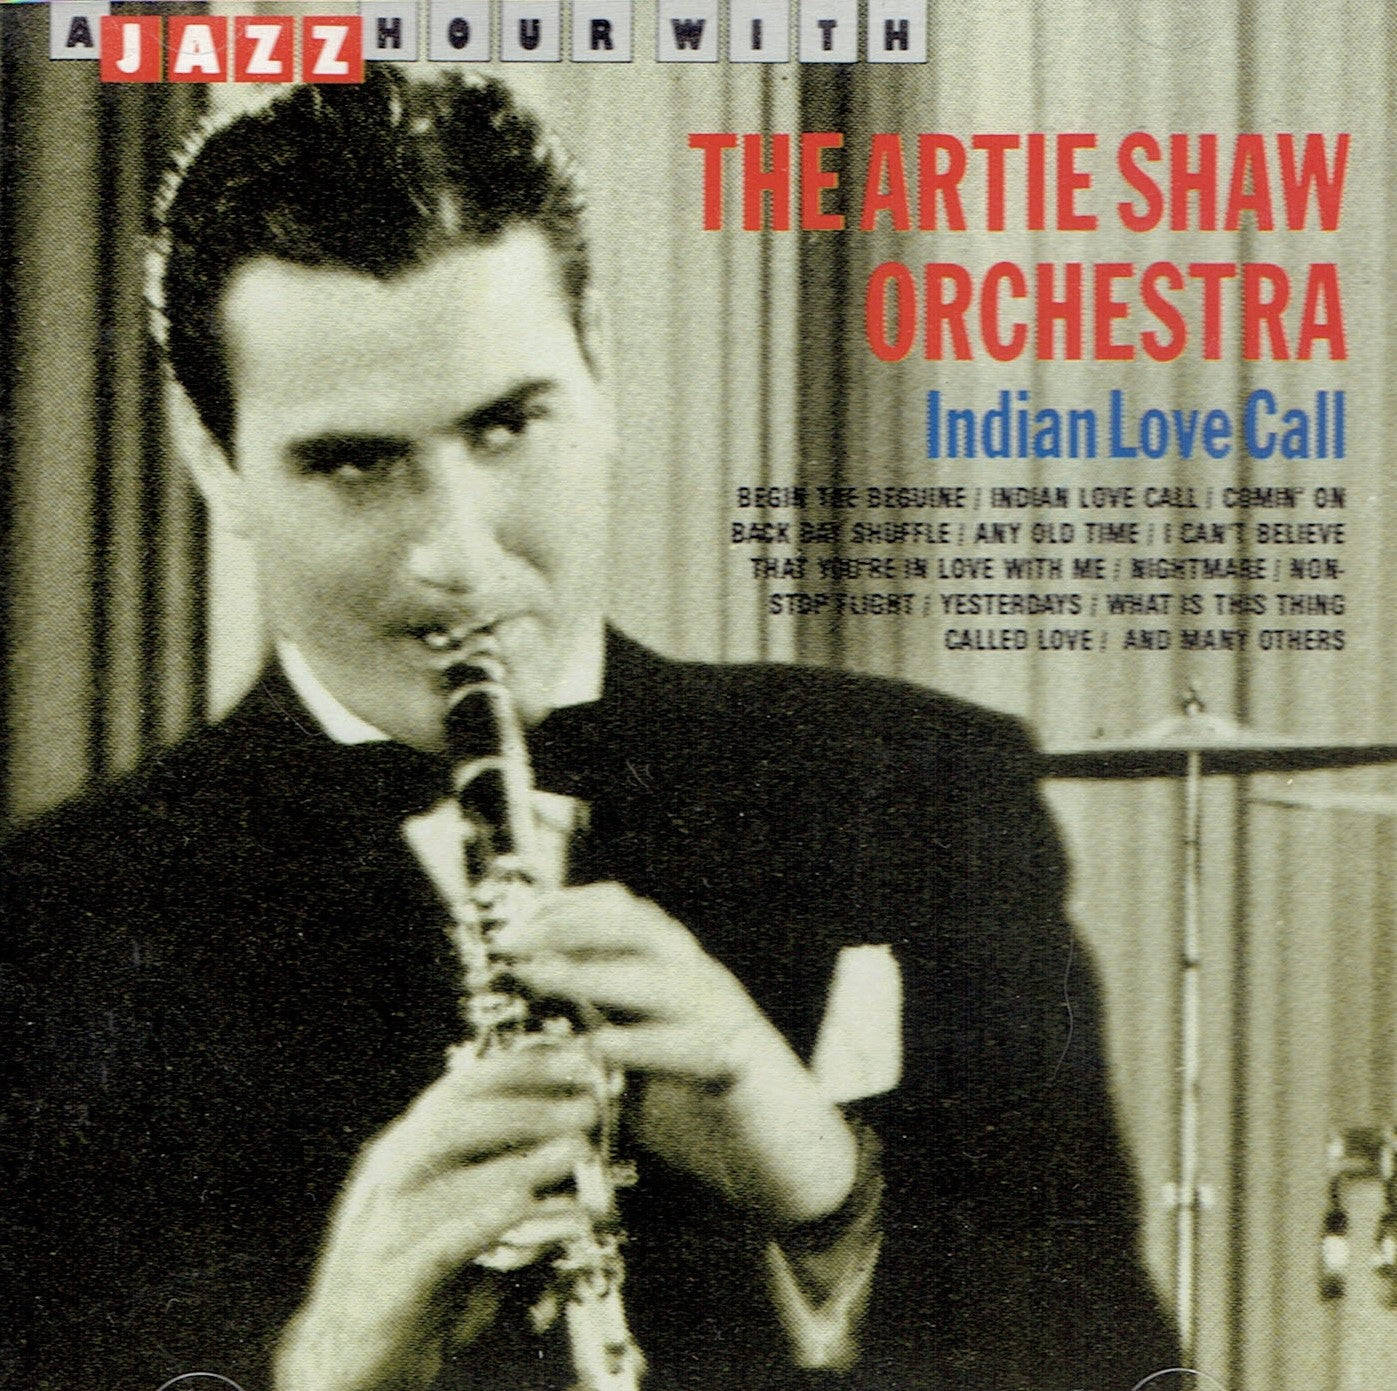 Artie Shaw Orchestra Indian Love Call Cover. Wallpaper